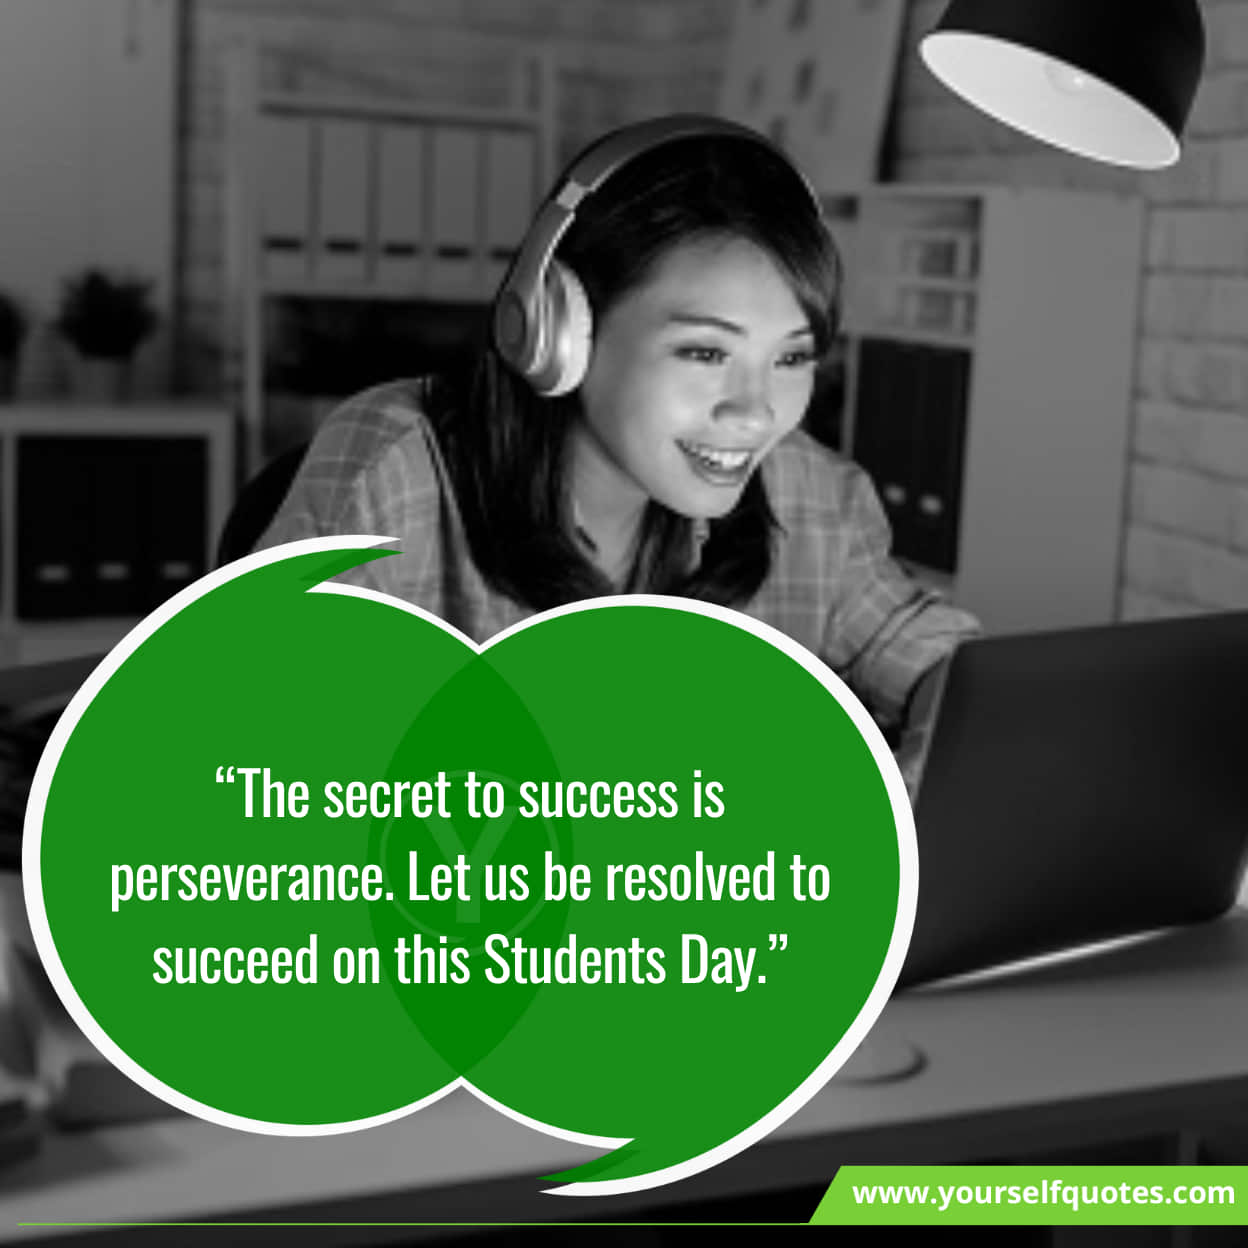 Inspiring Quotes On Happy Students Day